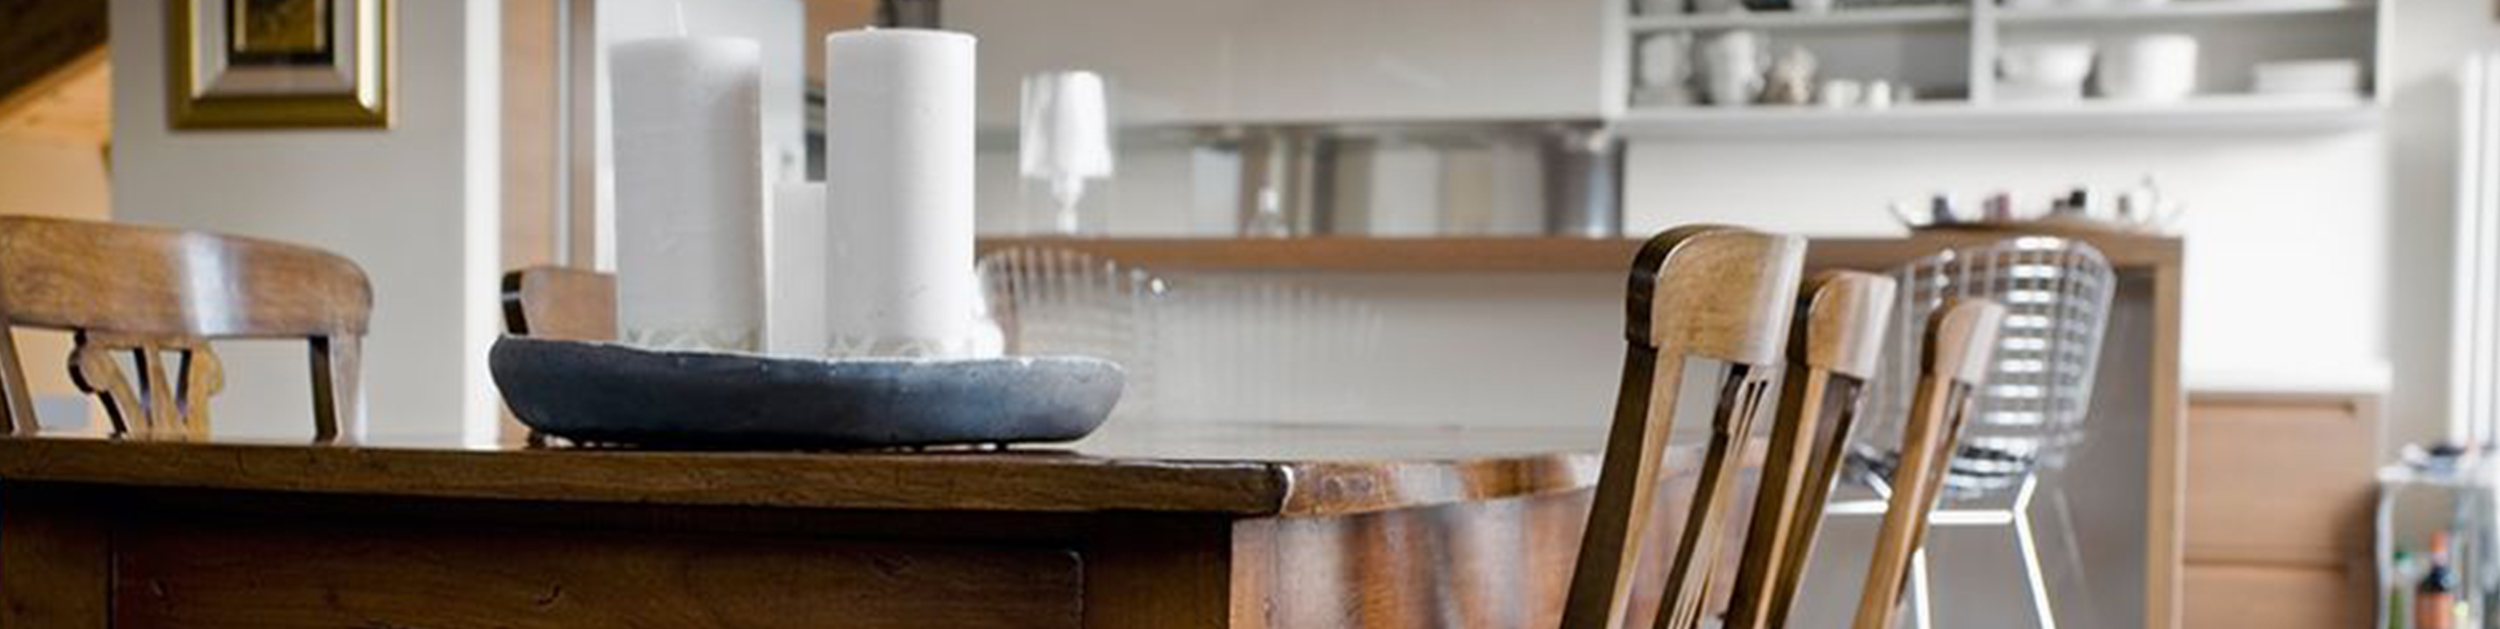 image of wooden kitchen island with white candles on top and wooden stools